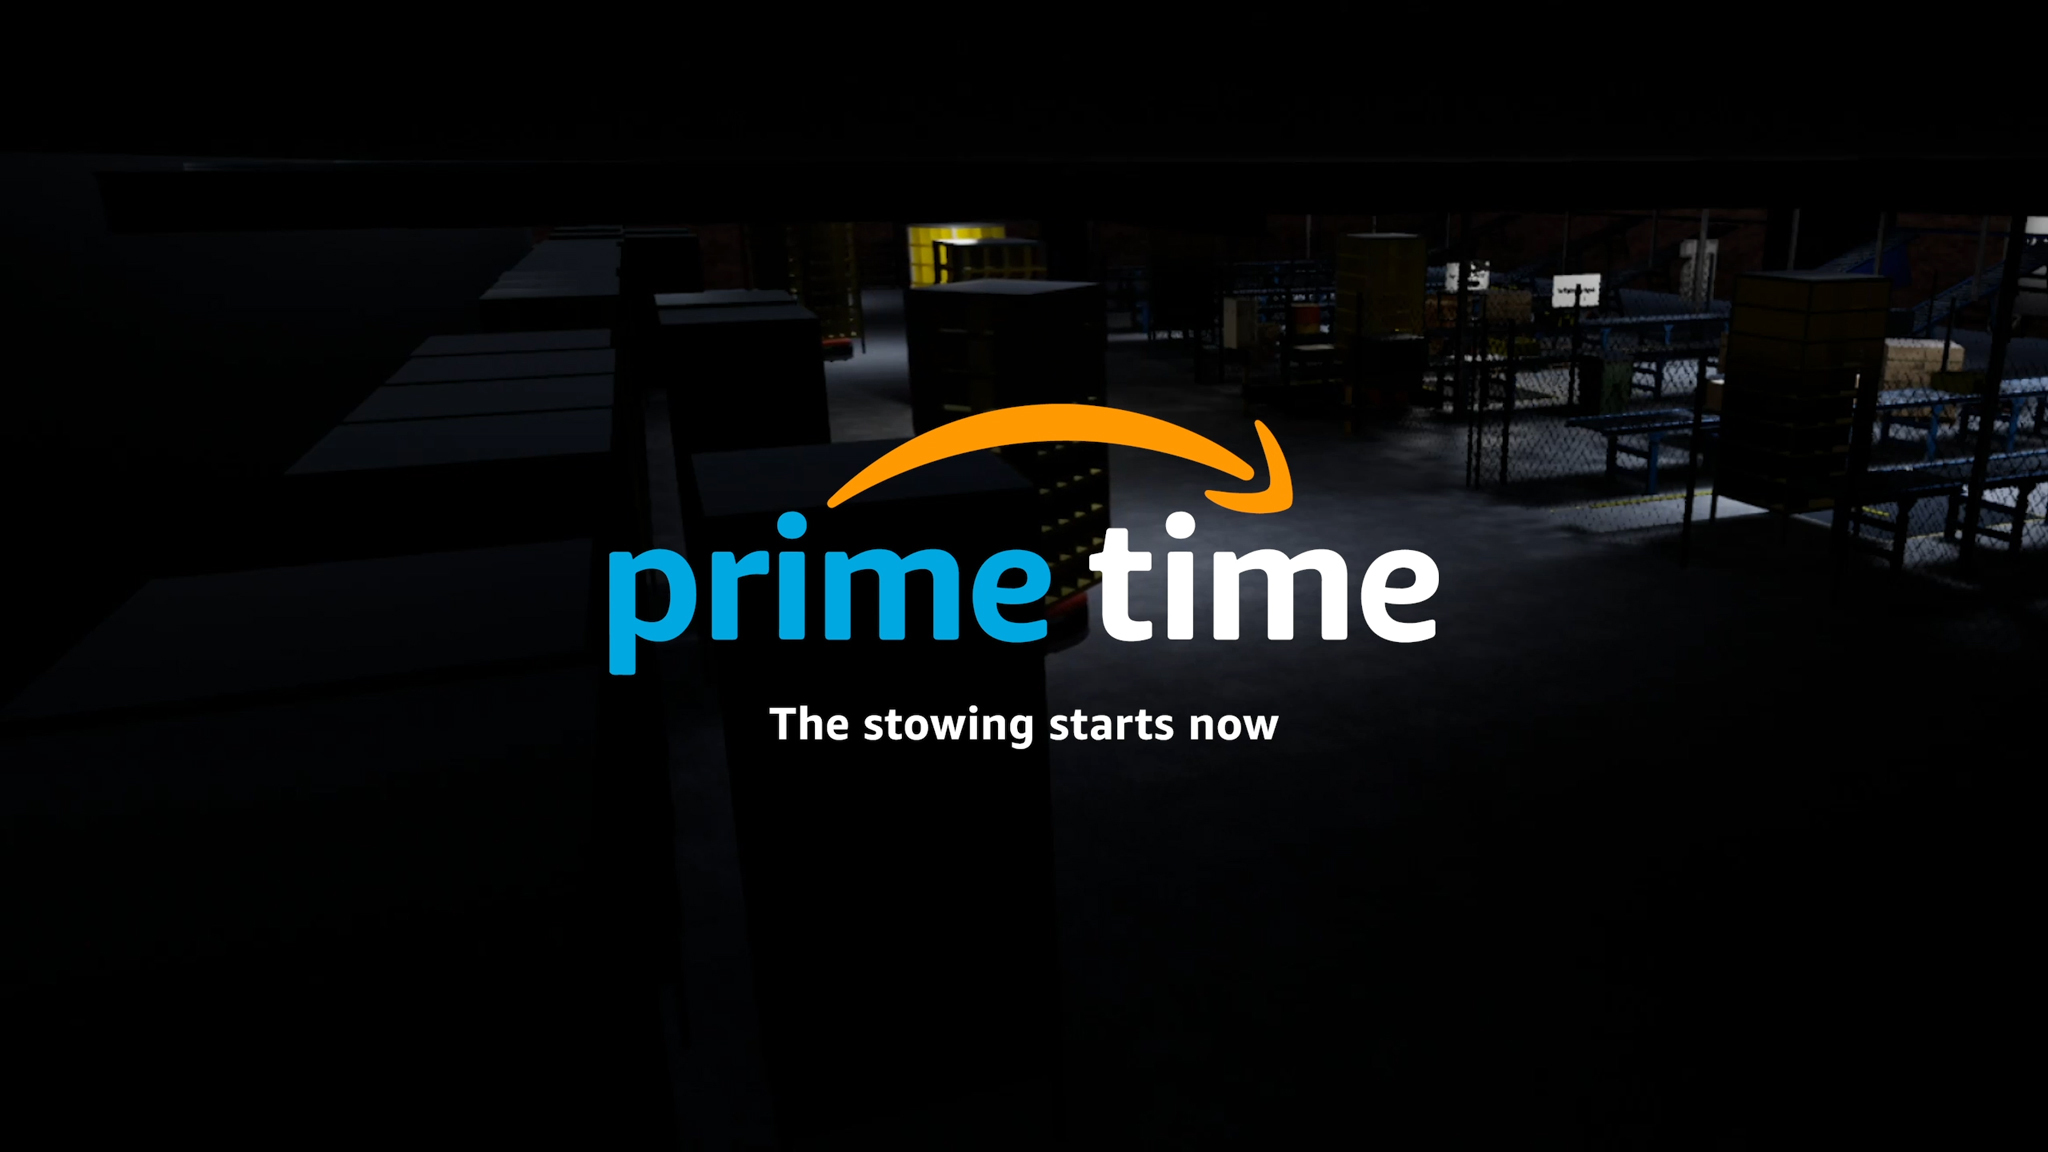 Prime time poster image